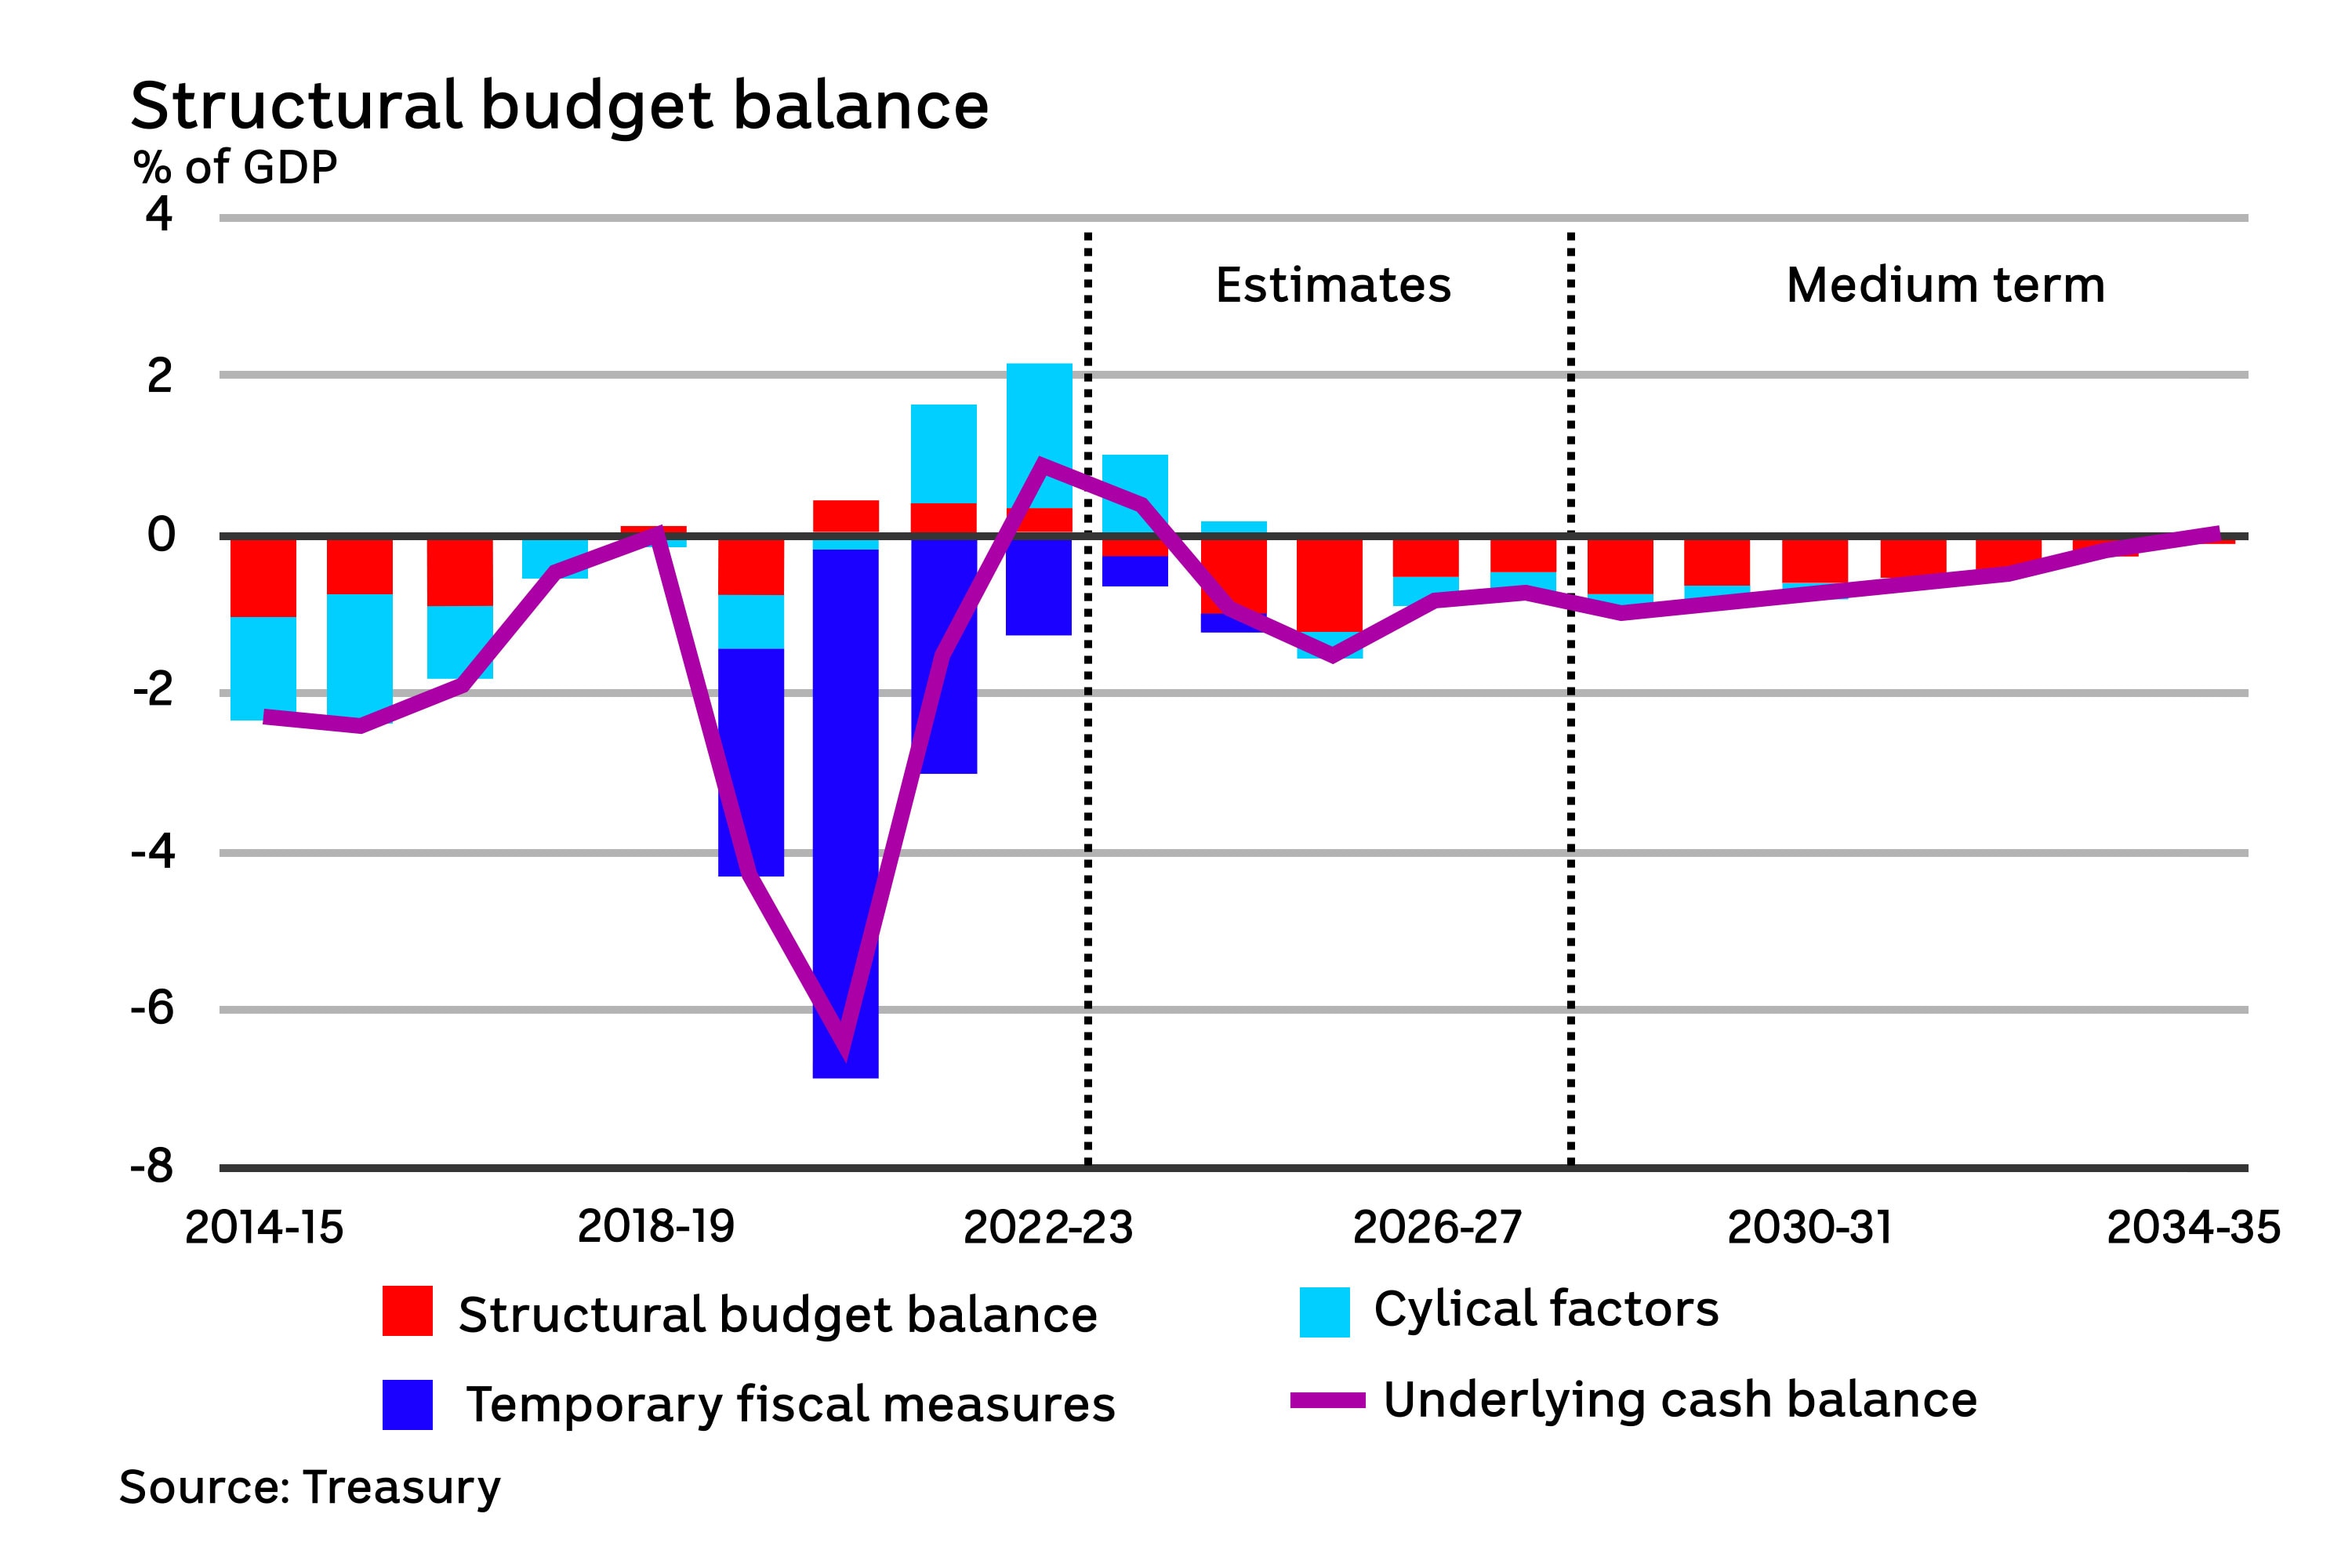 The budget is in a structural deficit, as it has been for most of the past 20 years.